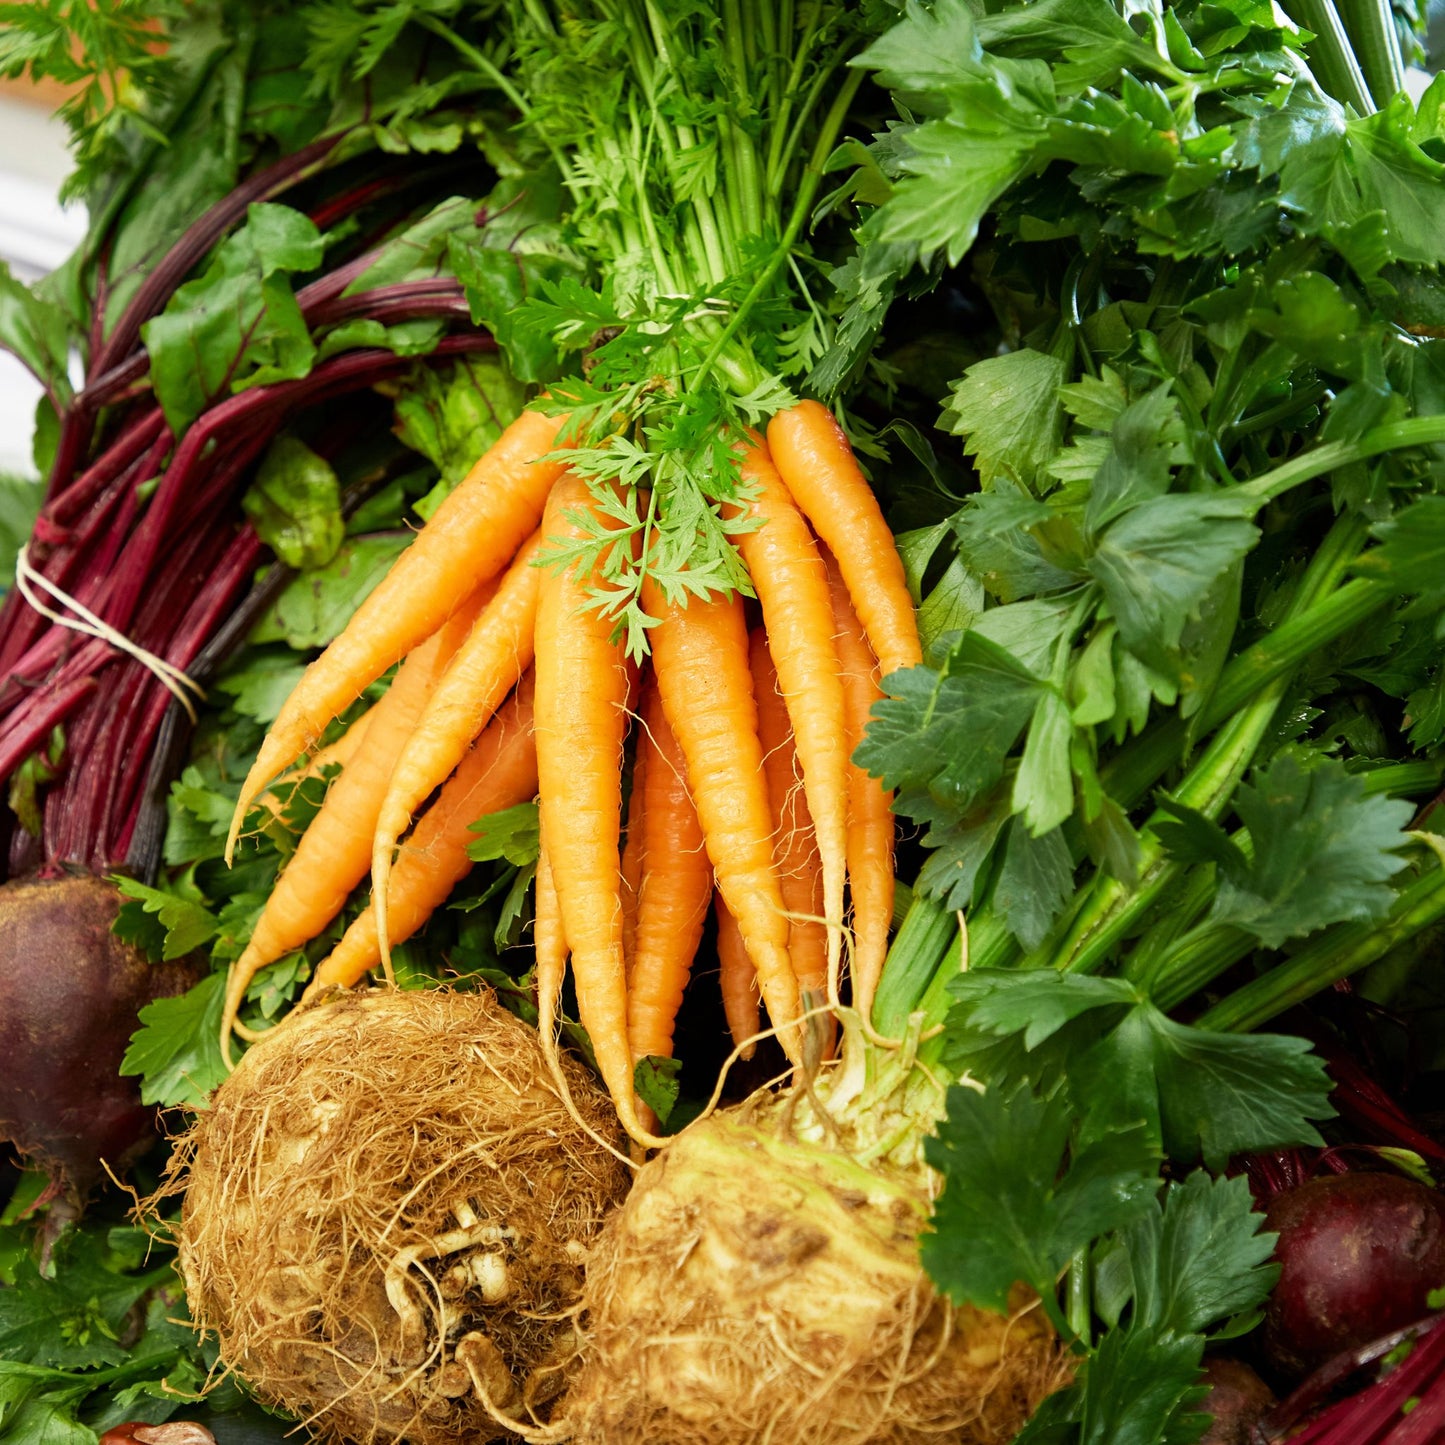 A pile of home grown vegetables including beetroots, carrots, celeriac